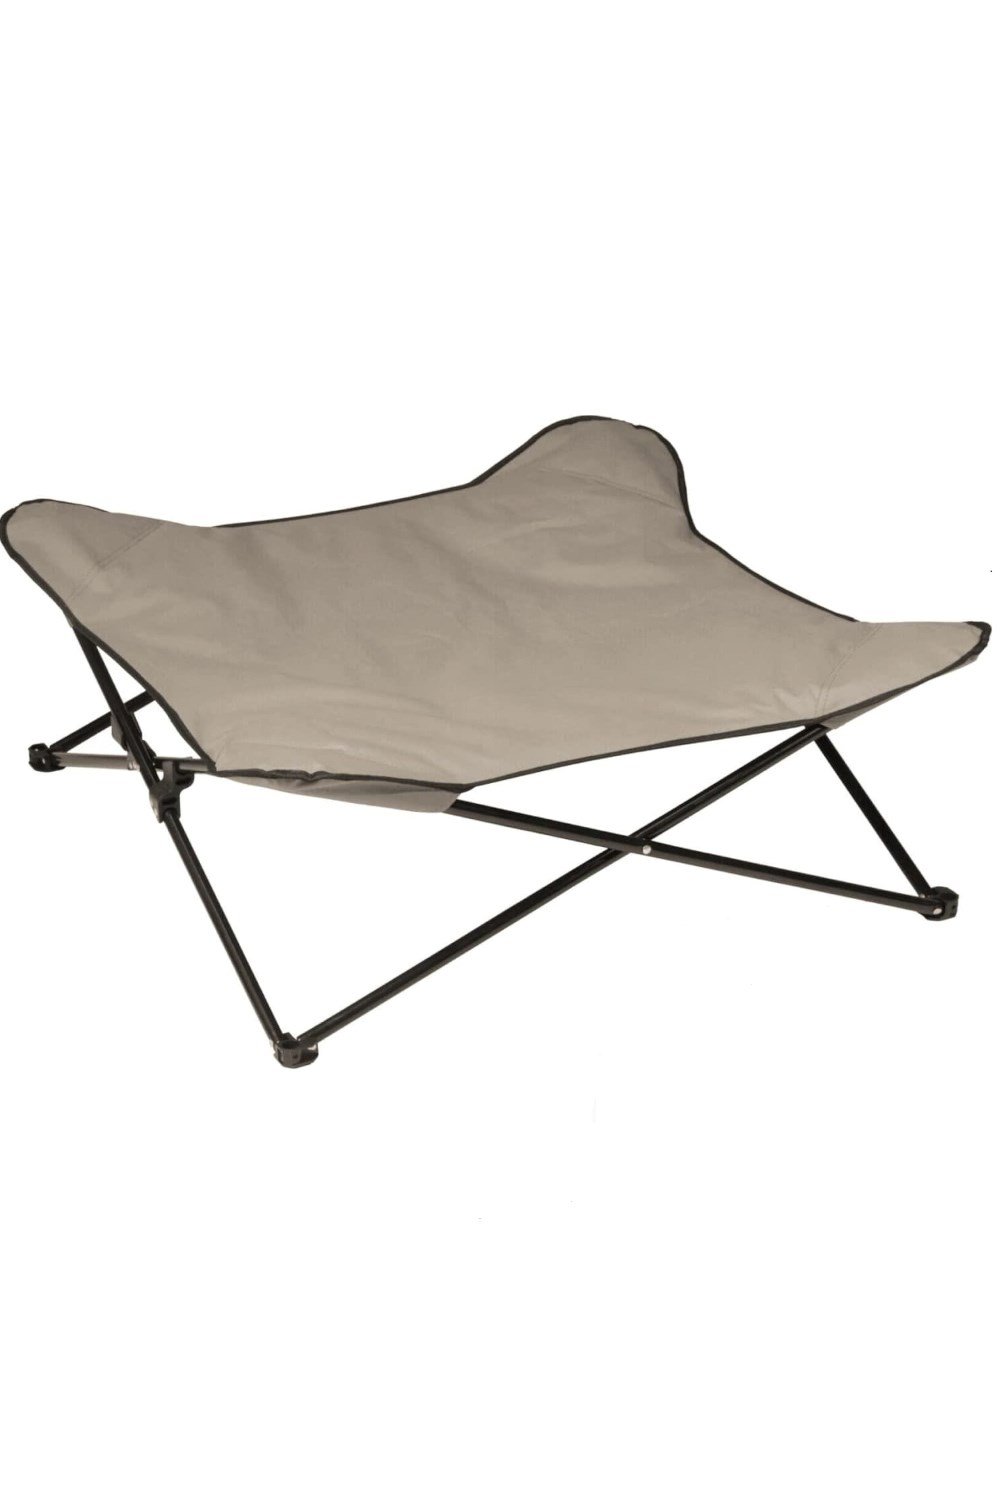 Portable Raised Dog Bed Camping Cot with Legs -